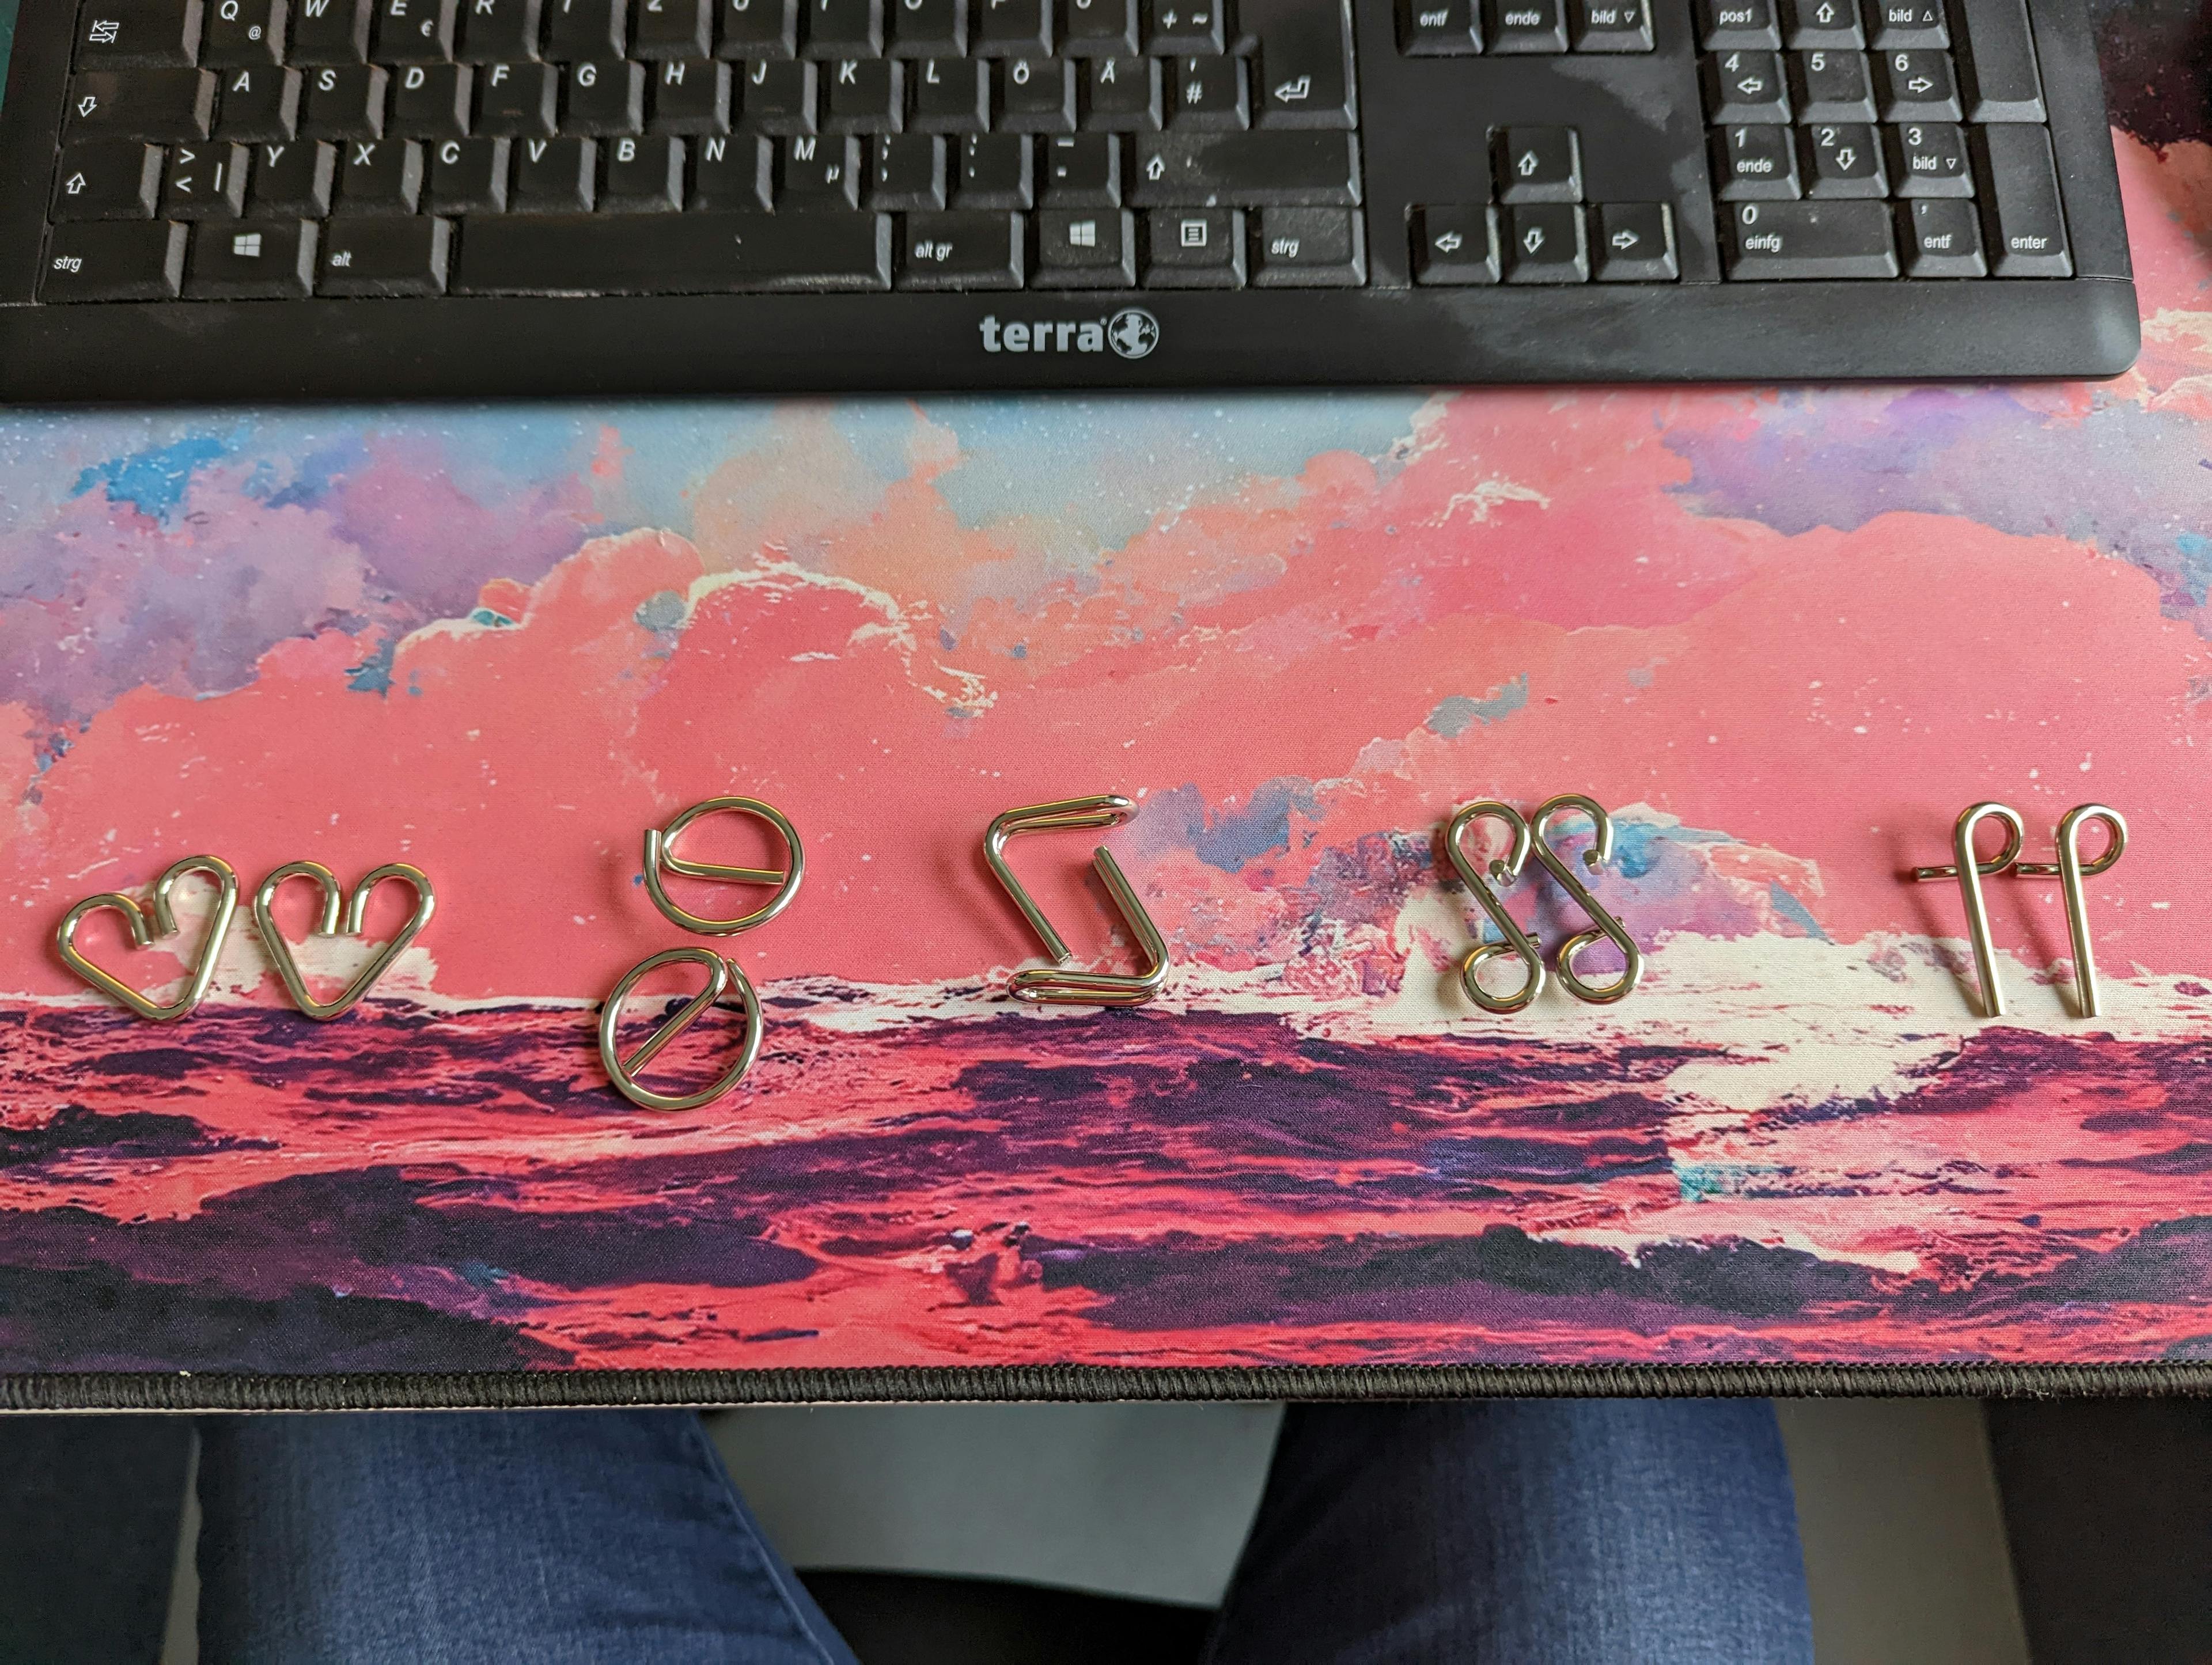 Review photo of deskmat by Thomas